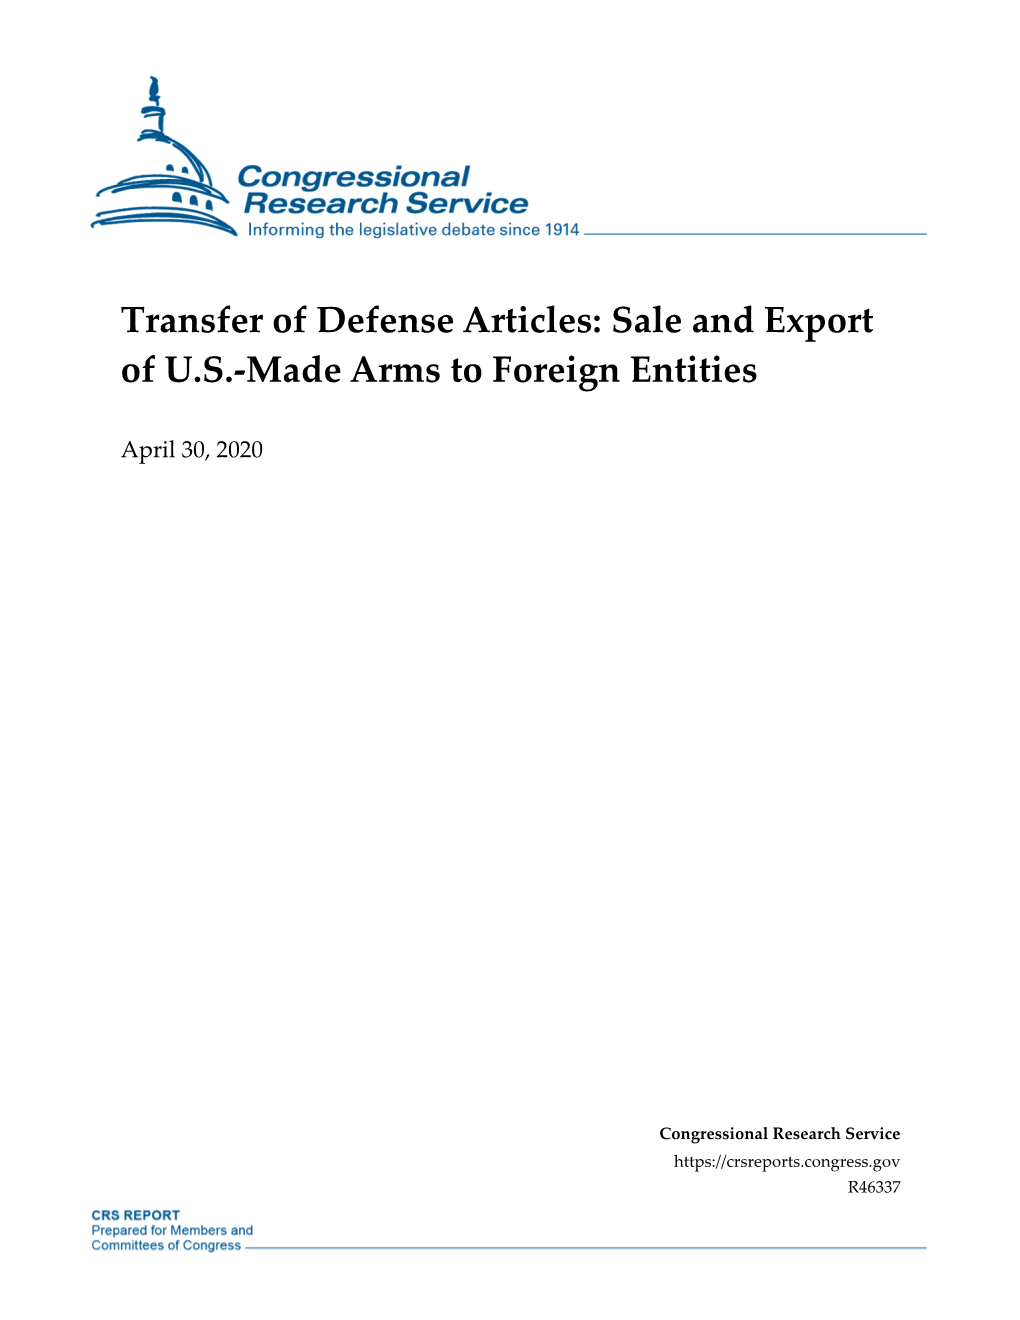 Sale and Export of US-Made Arms to Foreign Entities